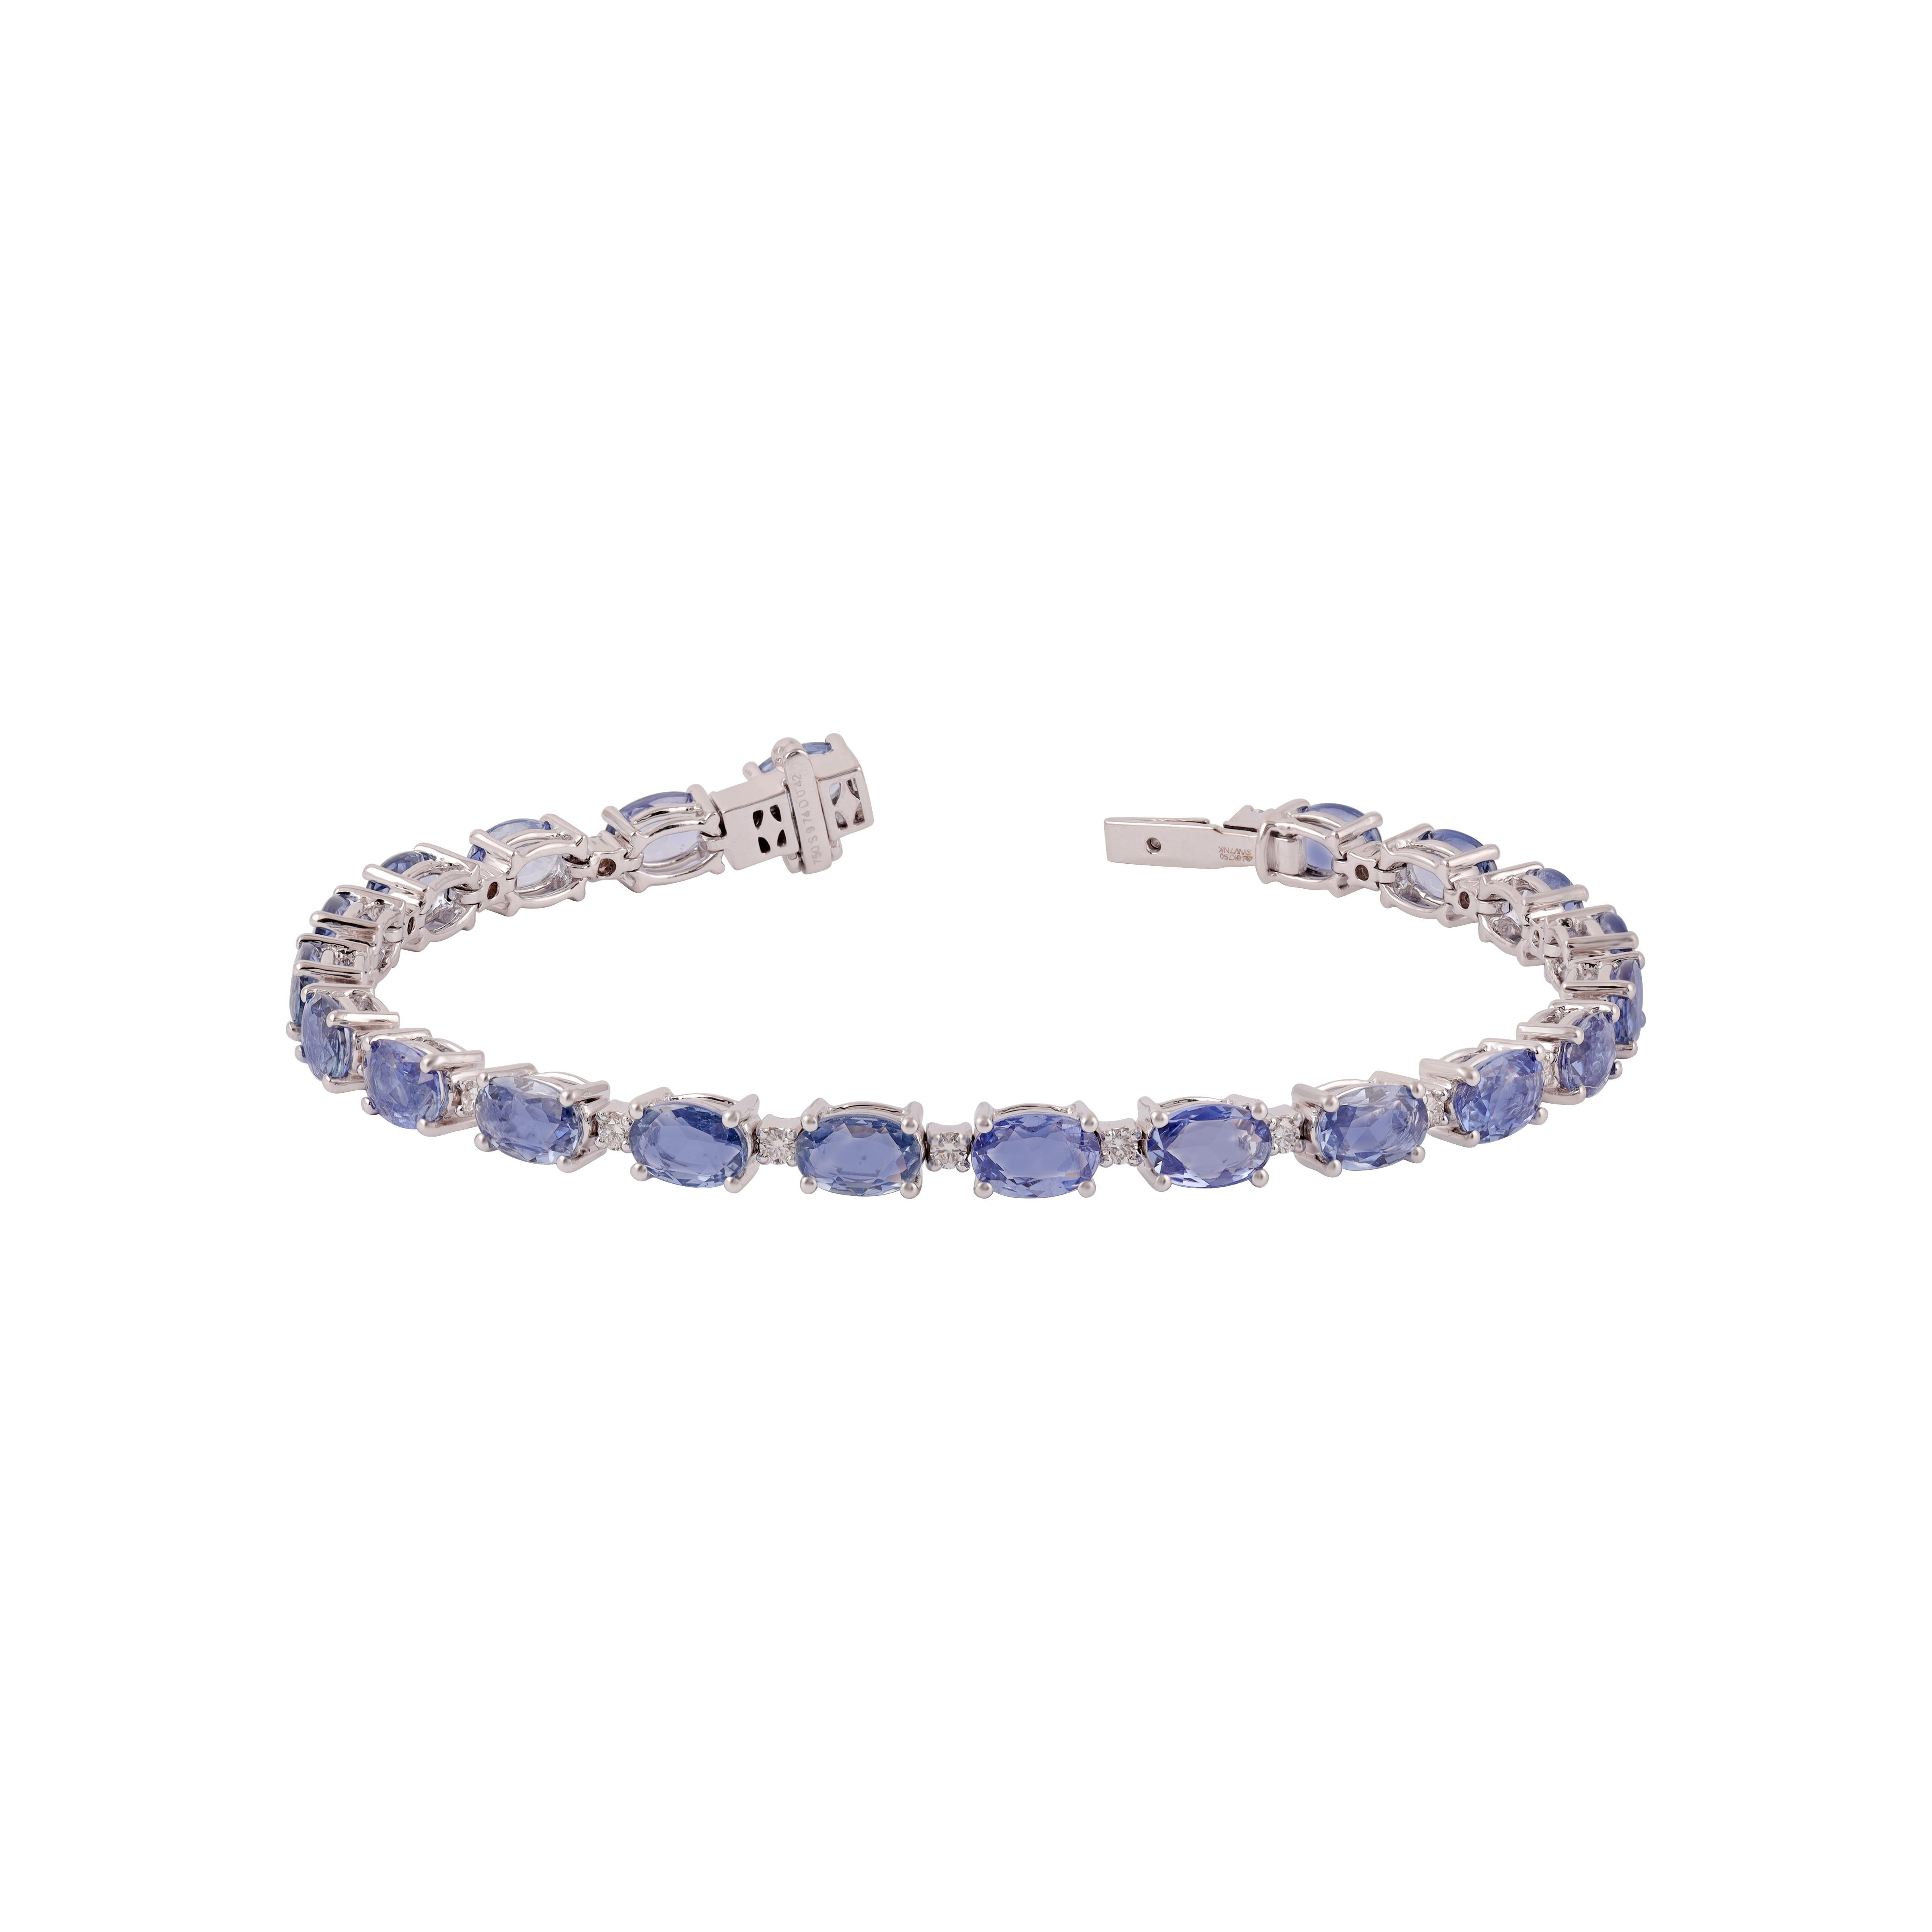 9.74 Carat Sapphire and Diamond  Bracelet in 18K White Gold

This magnificent Oval shape sapphire tennis bracelet is incredulous. The solitaire Oval-shaped Oval-cut sapphires are beautifully With Single  Diamonds making the bracelet more graceful